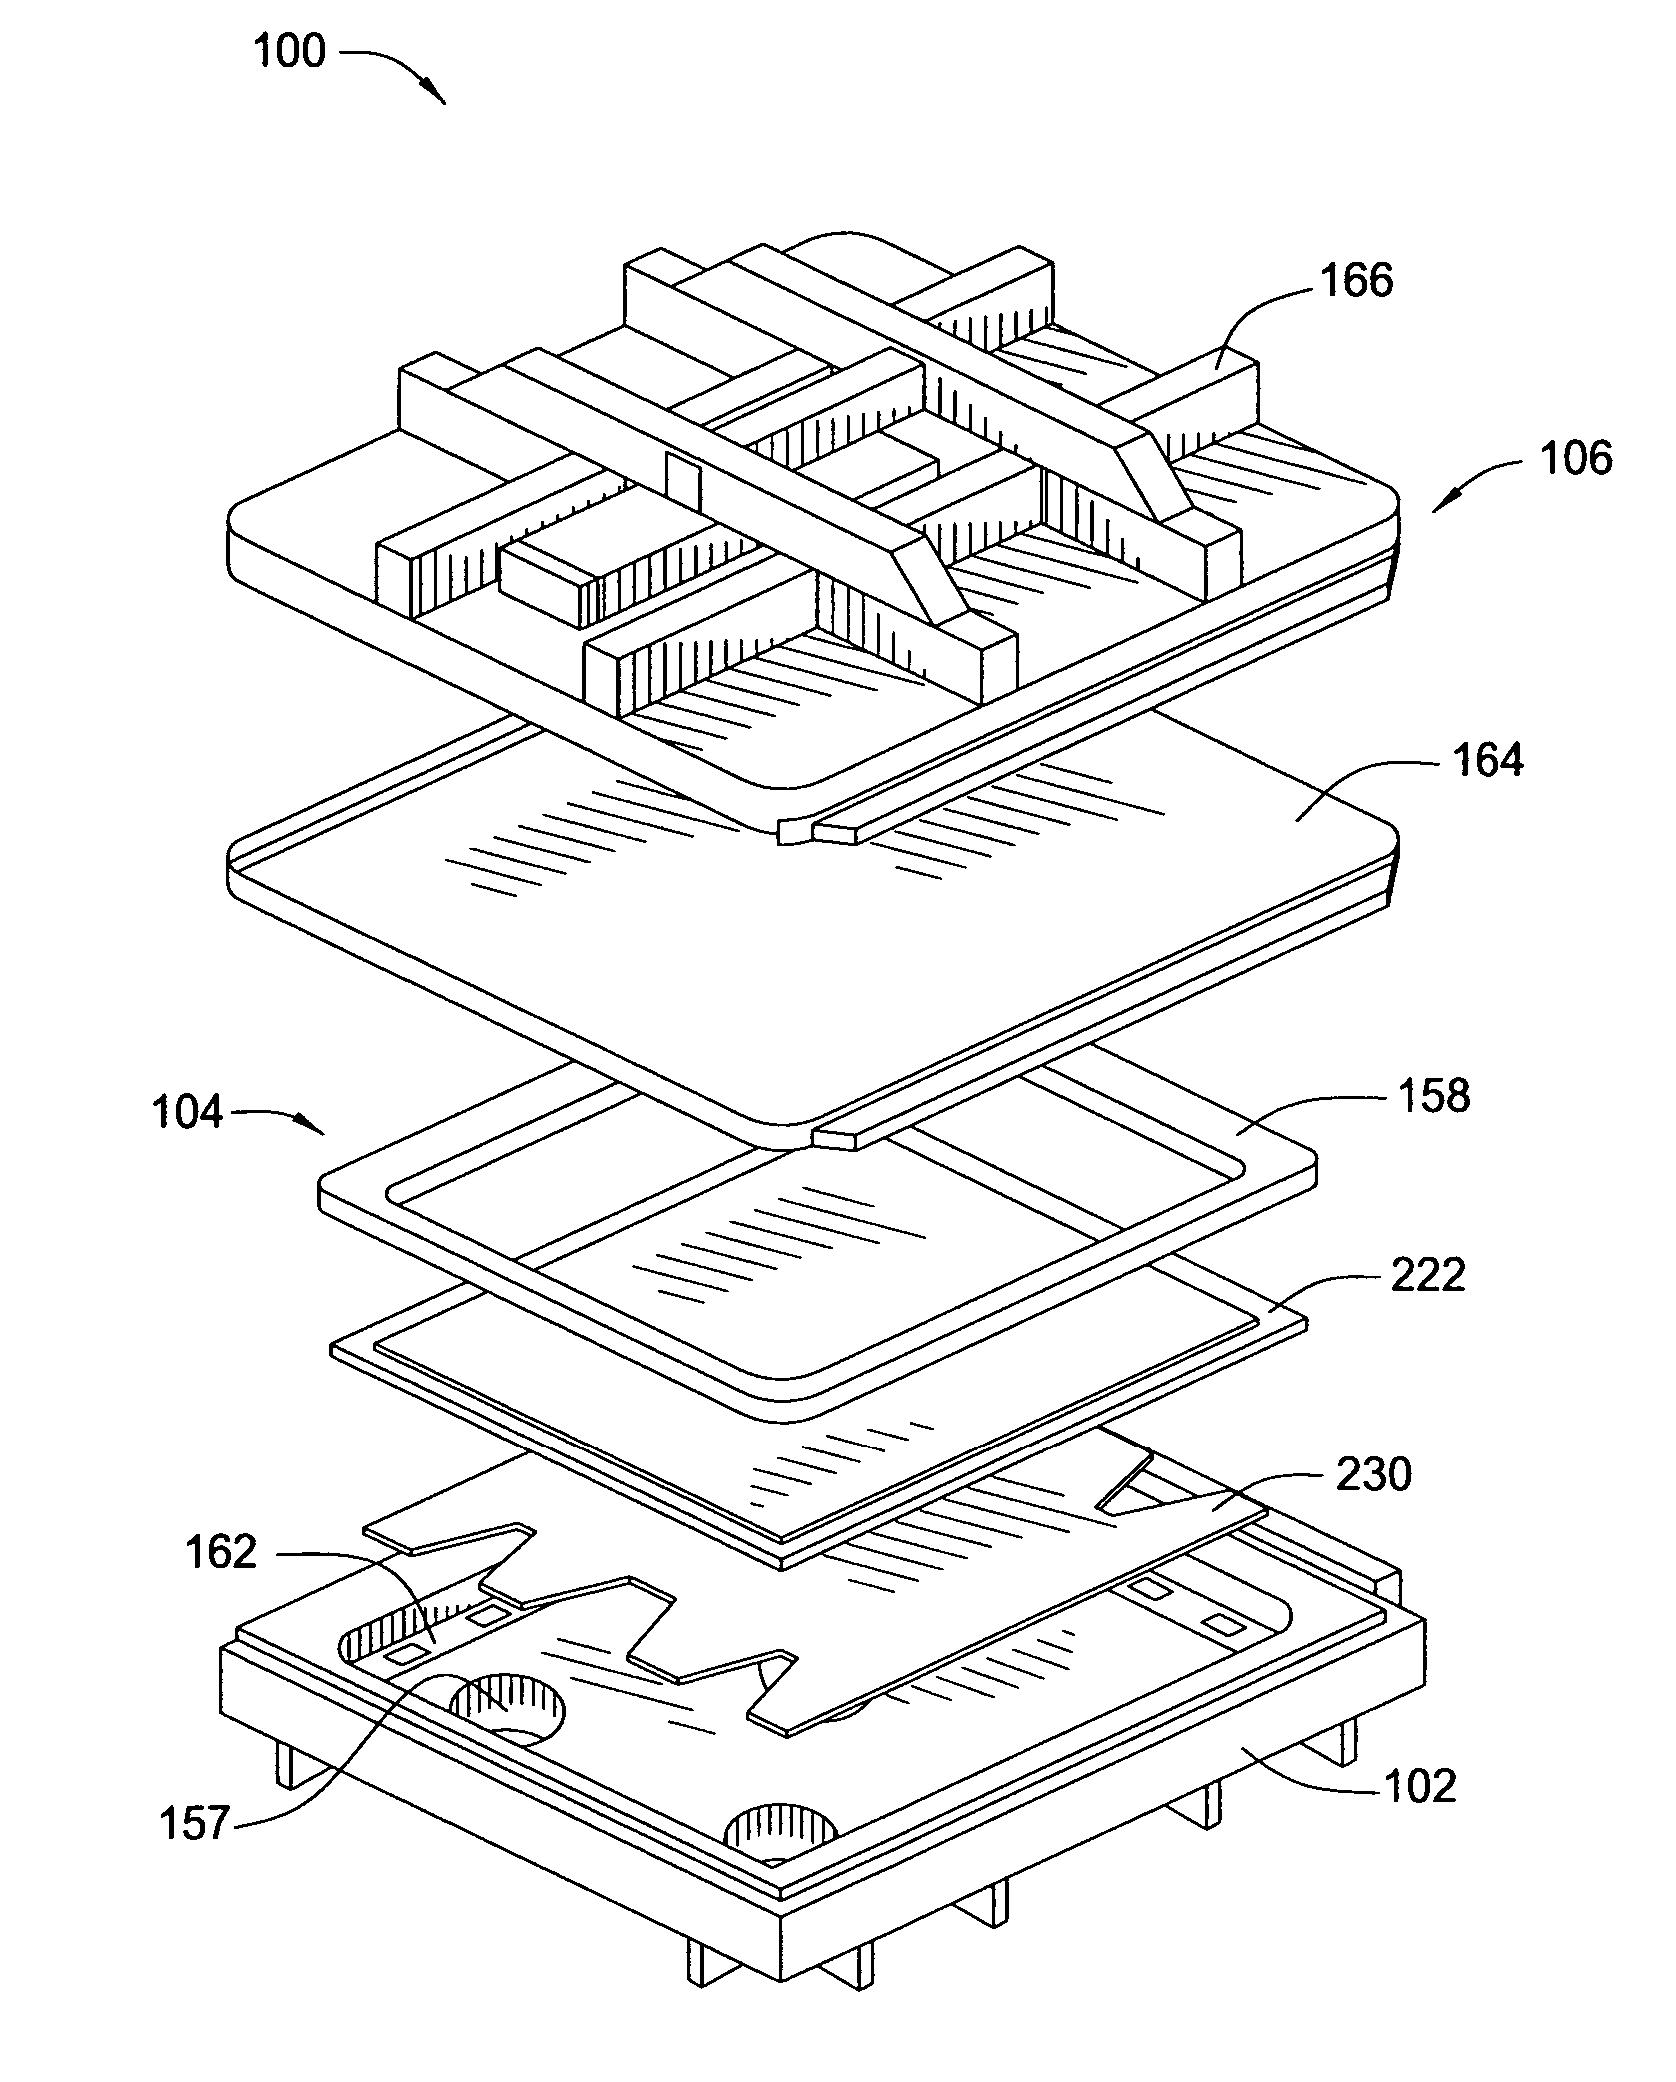 Heating and cooling of substrate support